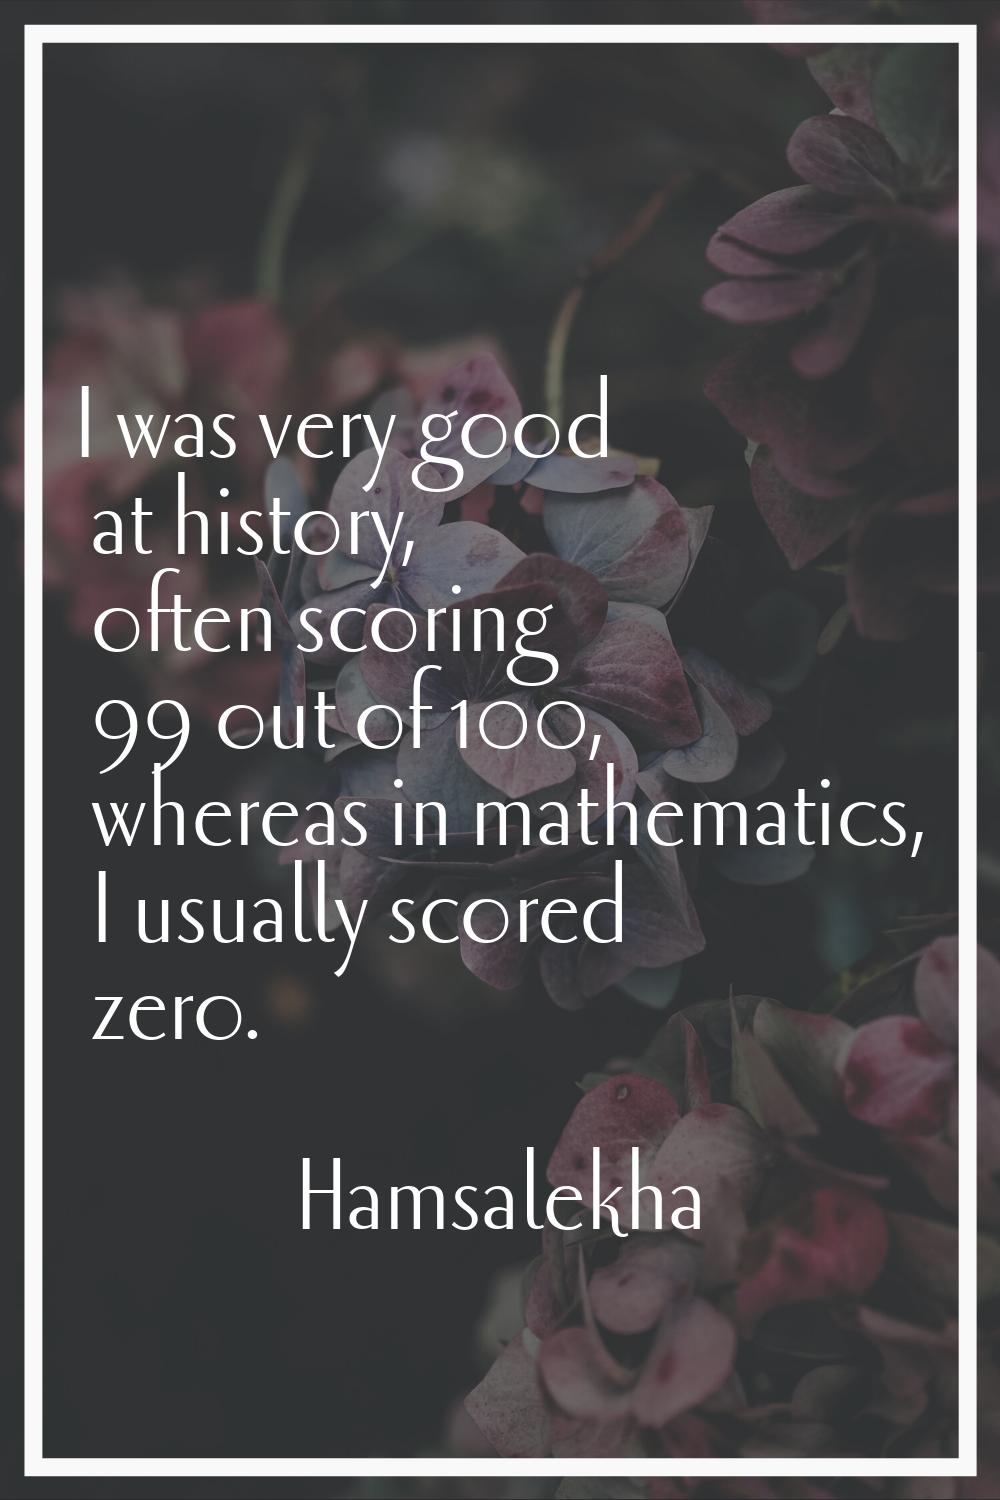 I was very good at history, often scoring 99 out of 100, whereas in mathematics, I usually scored z